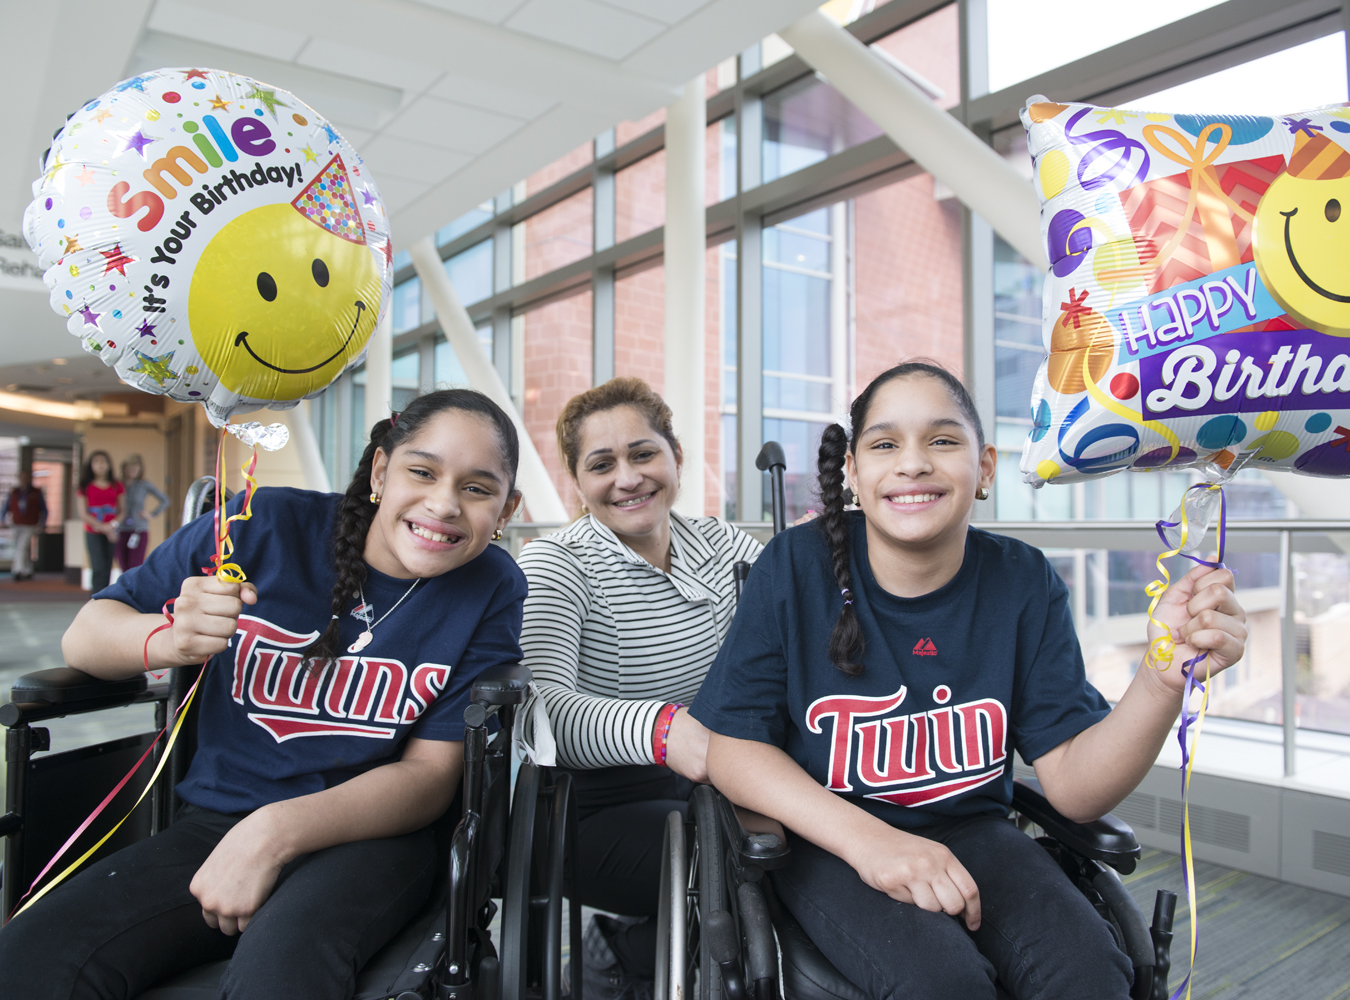 The Marias celebrate their 11th birthday at Gillette.They're big fans of the Minnesota Twins baseball team.